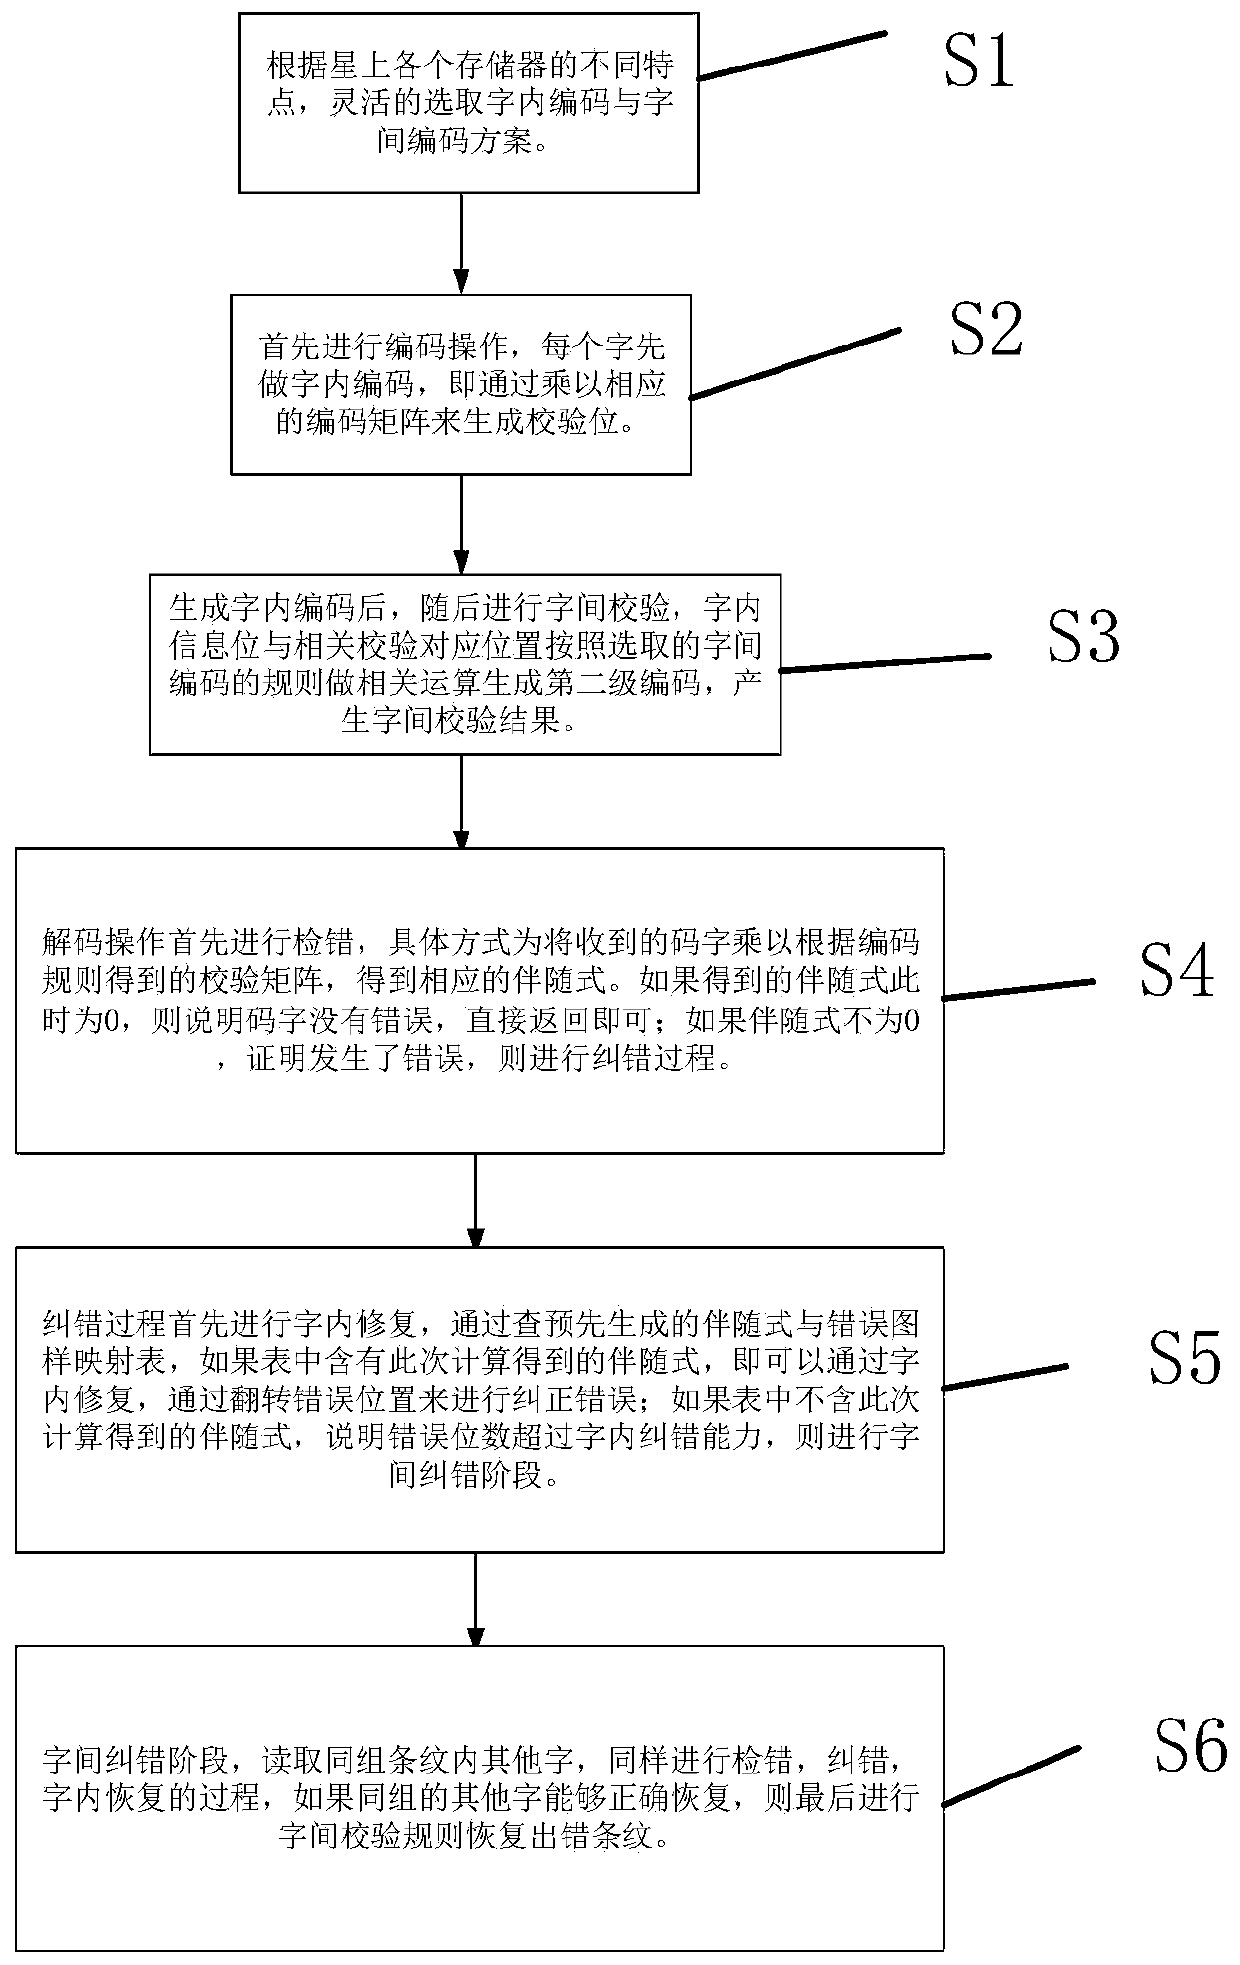 Two-stage error correction coding method and system applied to storage system in satellite severe environment